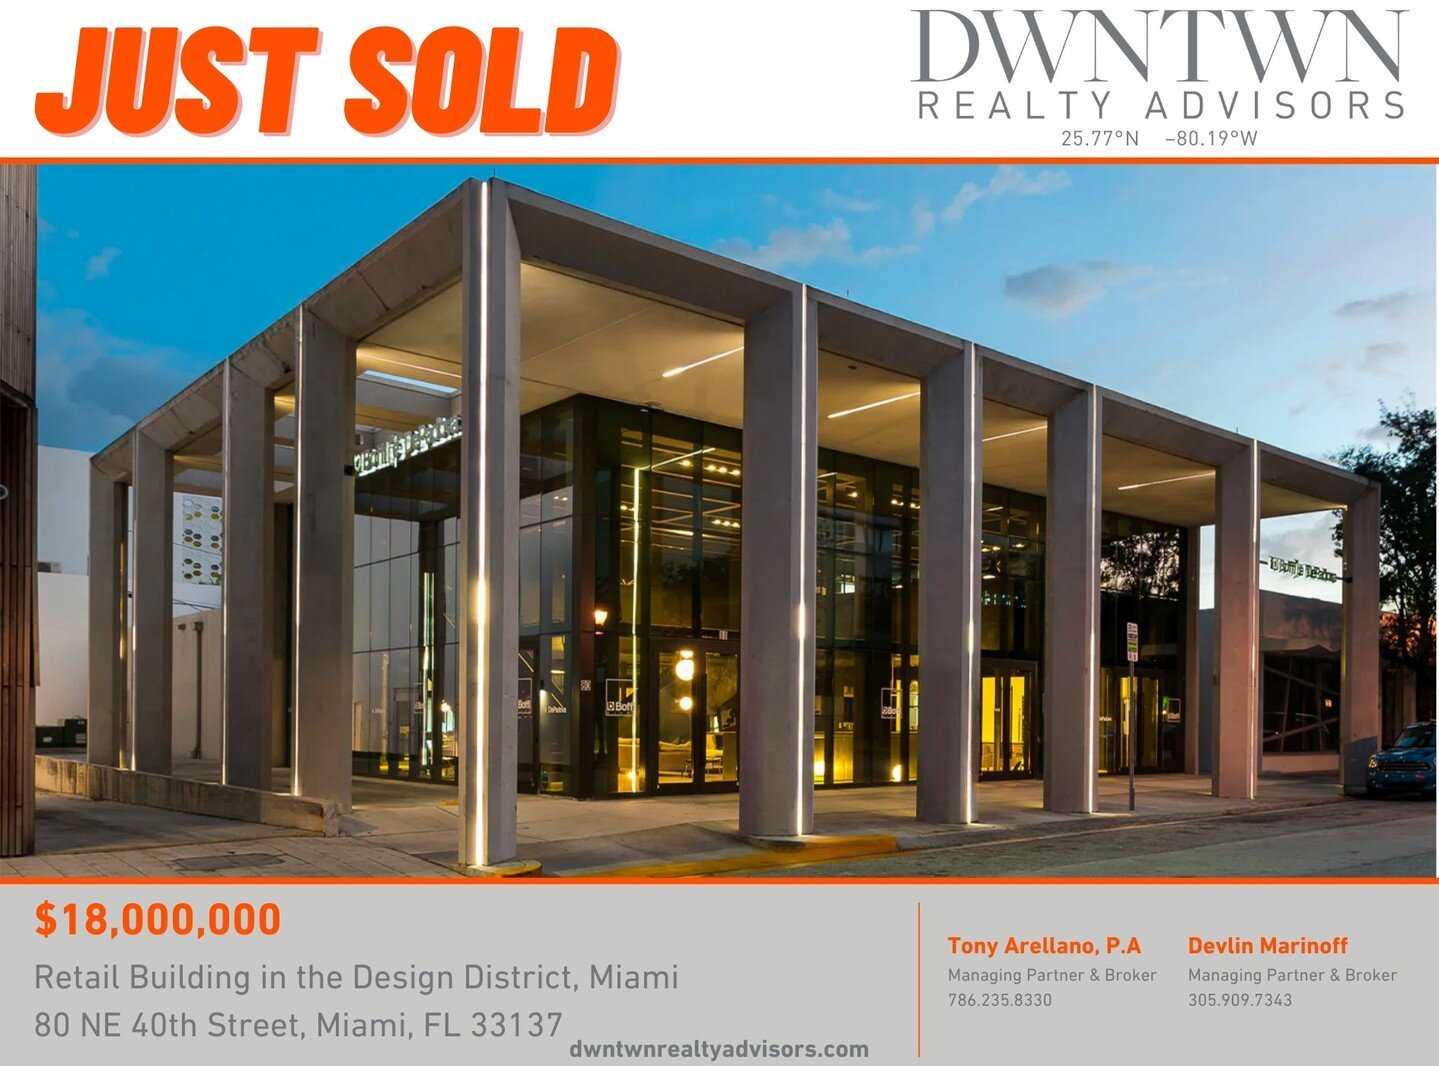 JUST SOLD FOR $18,000,000 | Retail Building in the Design District, Miami

DWNTWN Realty Advisors, the leading commercial real estate brokerage firm in Miami, proudly announces the successful completion of an $18 million sale transaction of 80 NE 40t